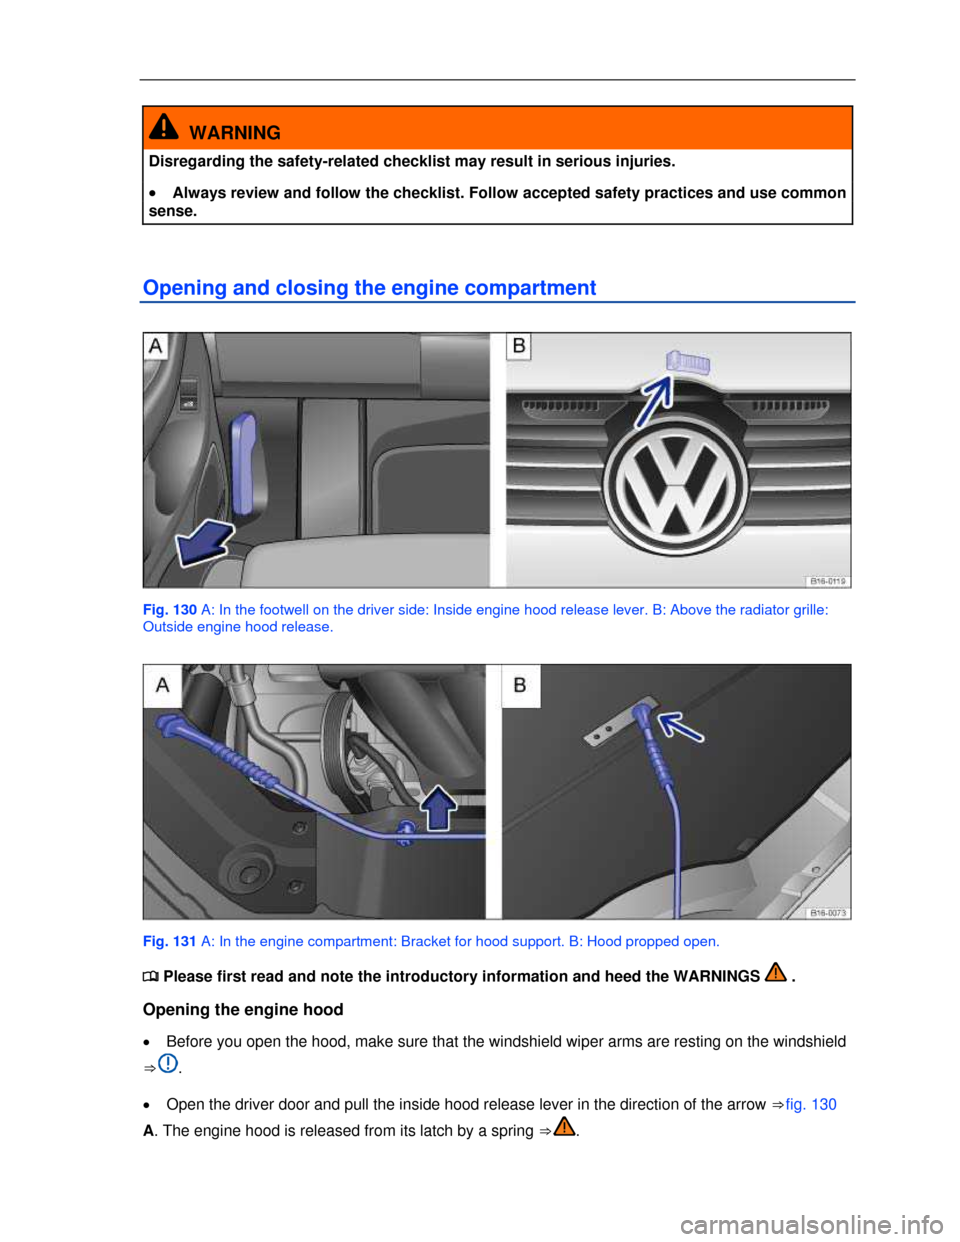 VOLKSWAGEN JETTA 2013 1B / 6.G User Guide  
 
  WARNING 
Disregarding the safety-related checklist may result in serious injuries. 
�x Always review and follow the checklist. Follow accepted safety practices and use common 
sense. 
Opening an